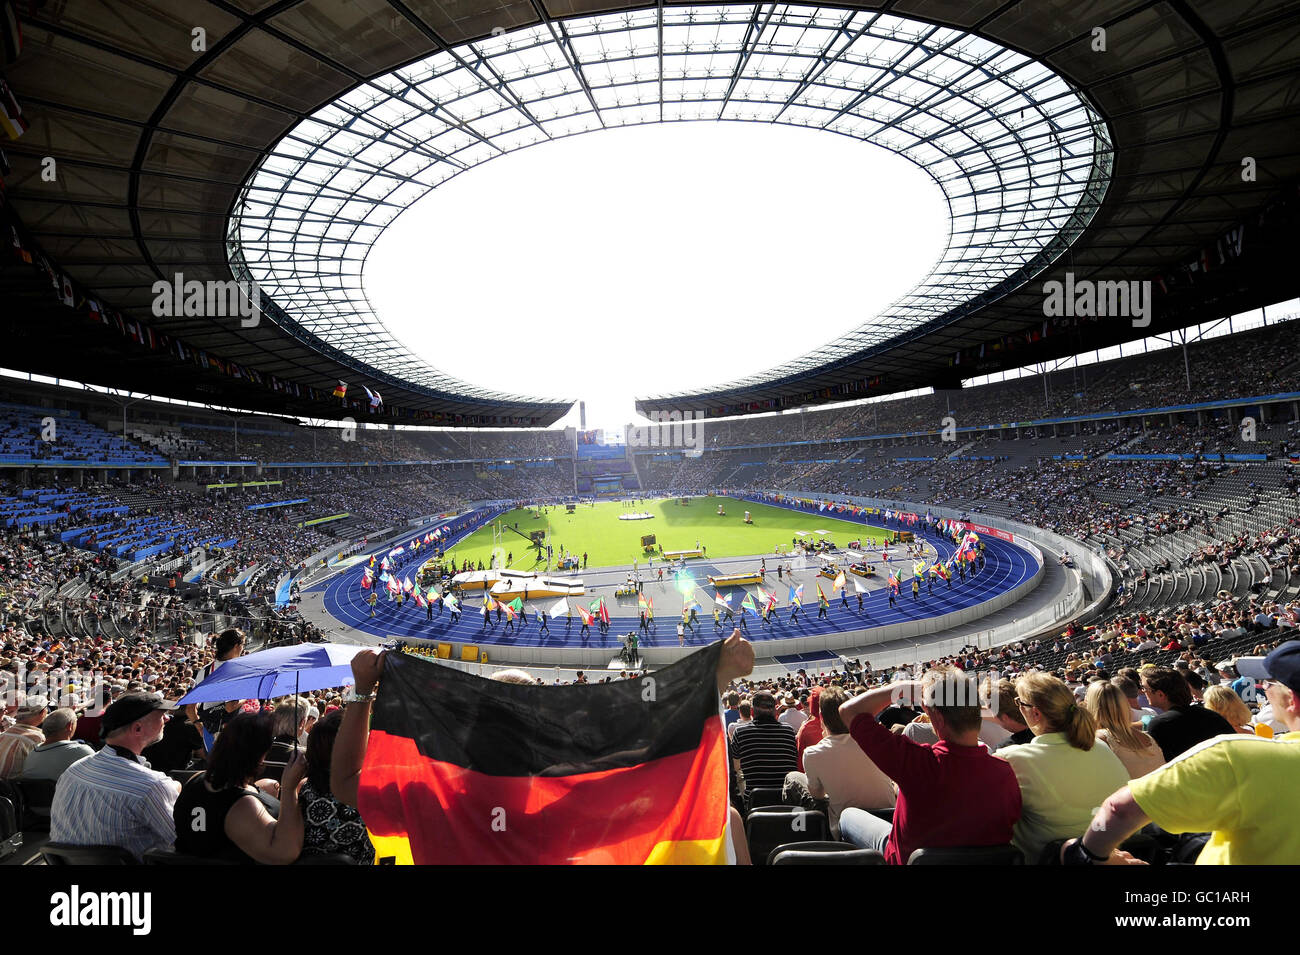 A view of the opening ceremony during the IAAF World Championships at the Olympiastadion, Berlin. Stock Photo